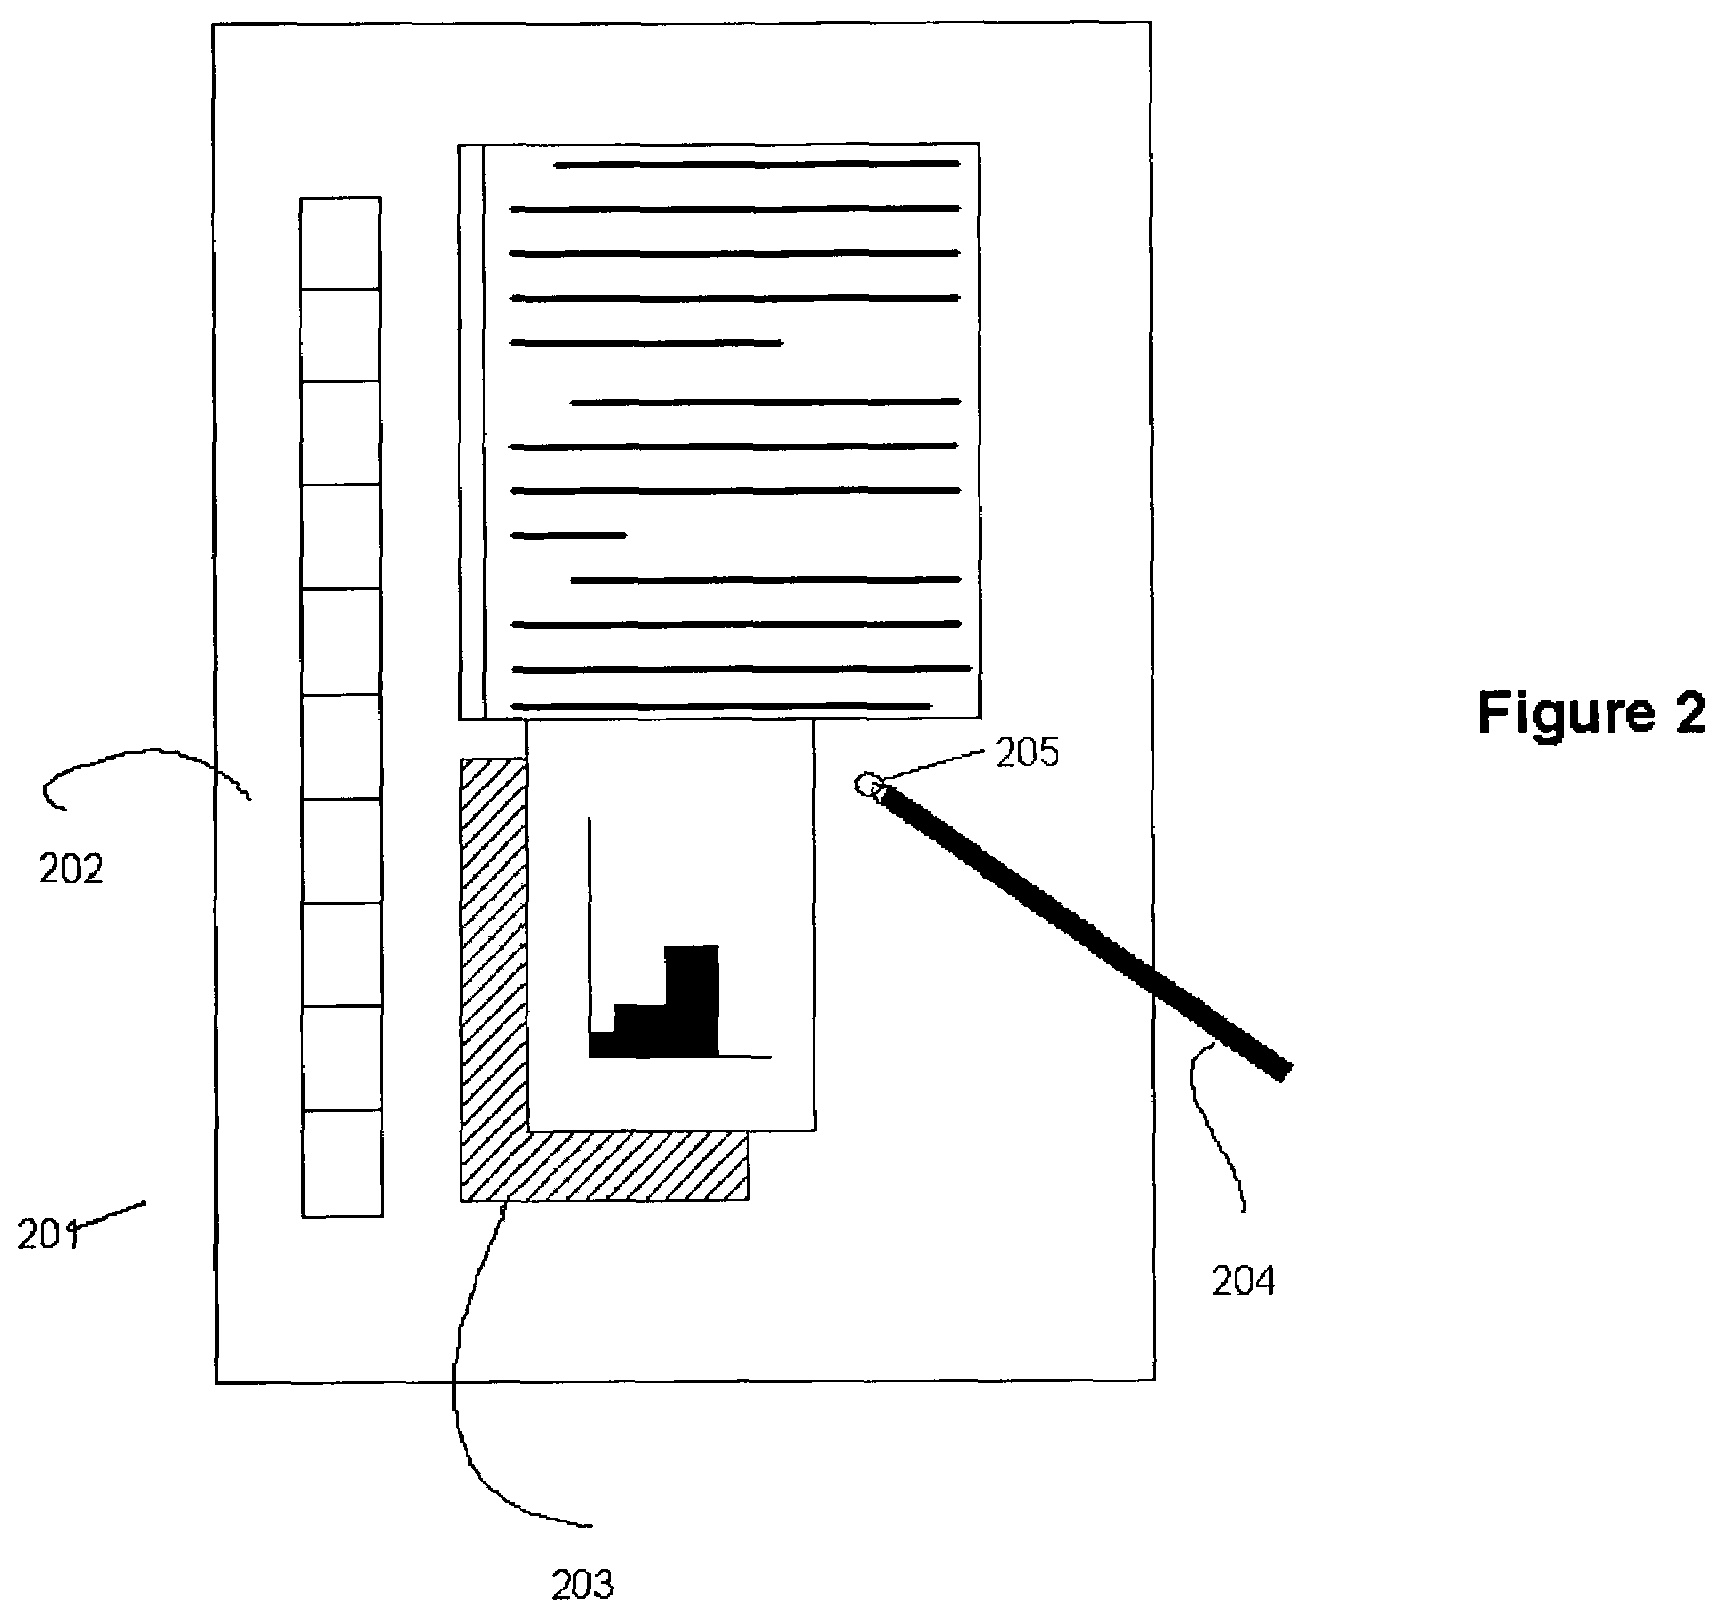 Correcting recognition results associated with user input